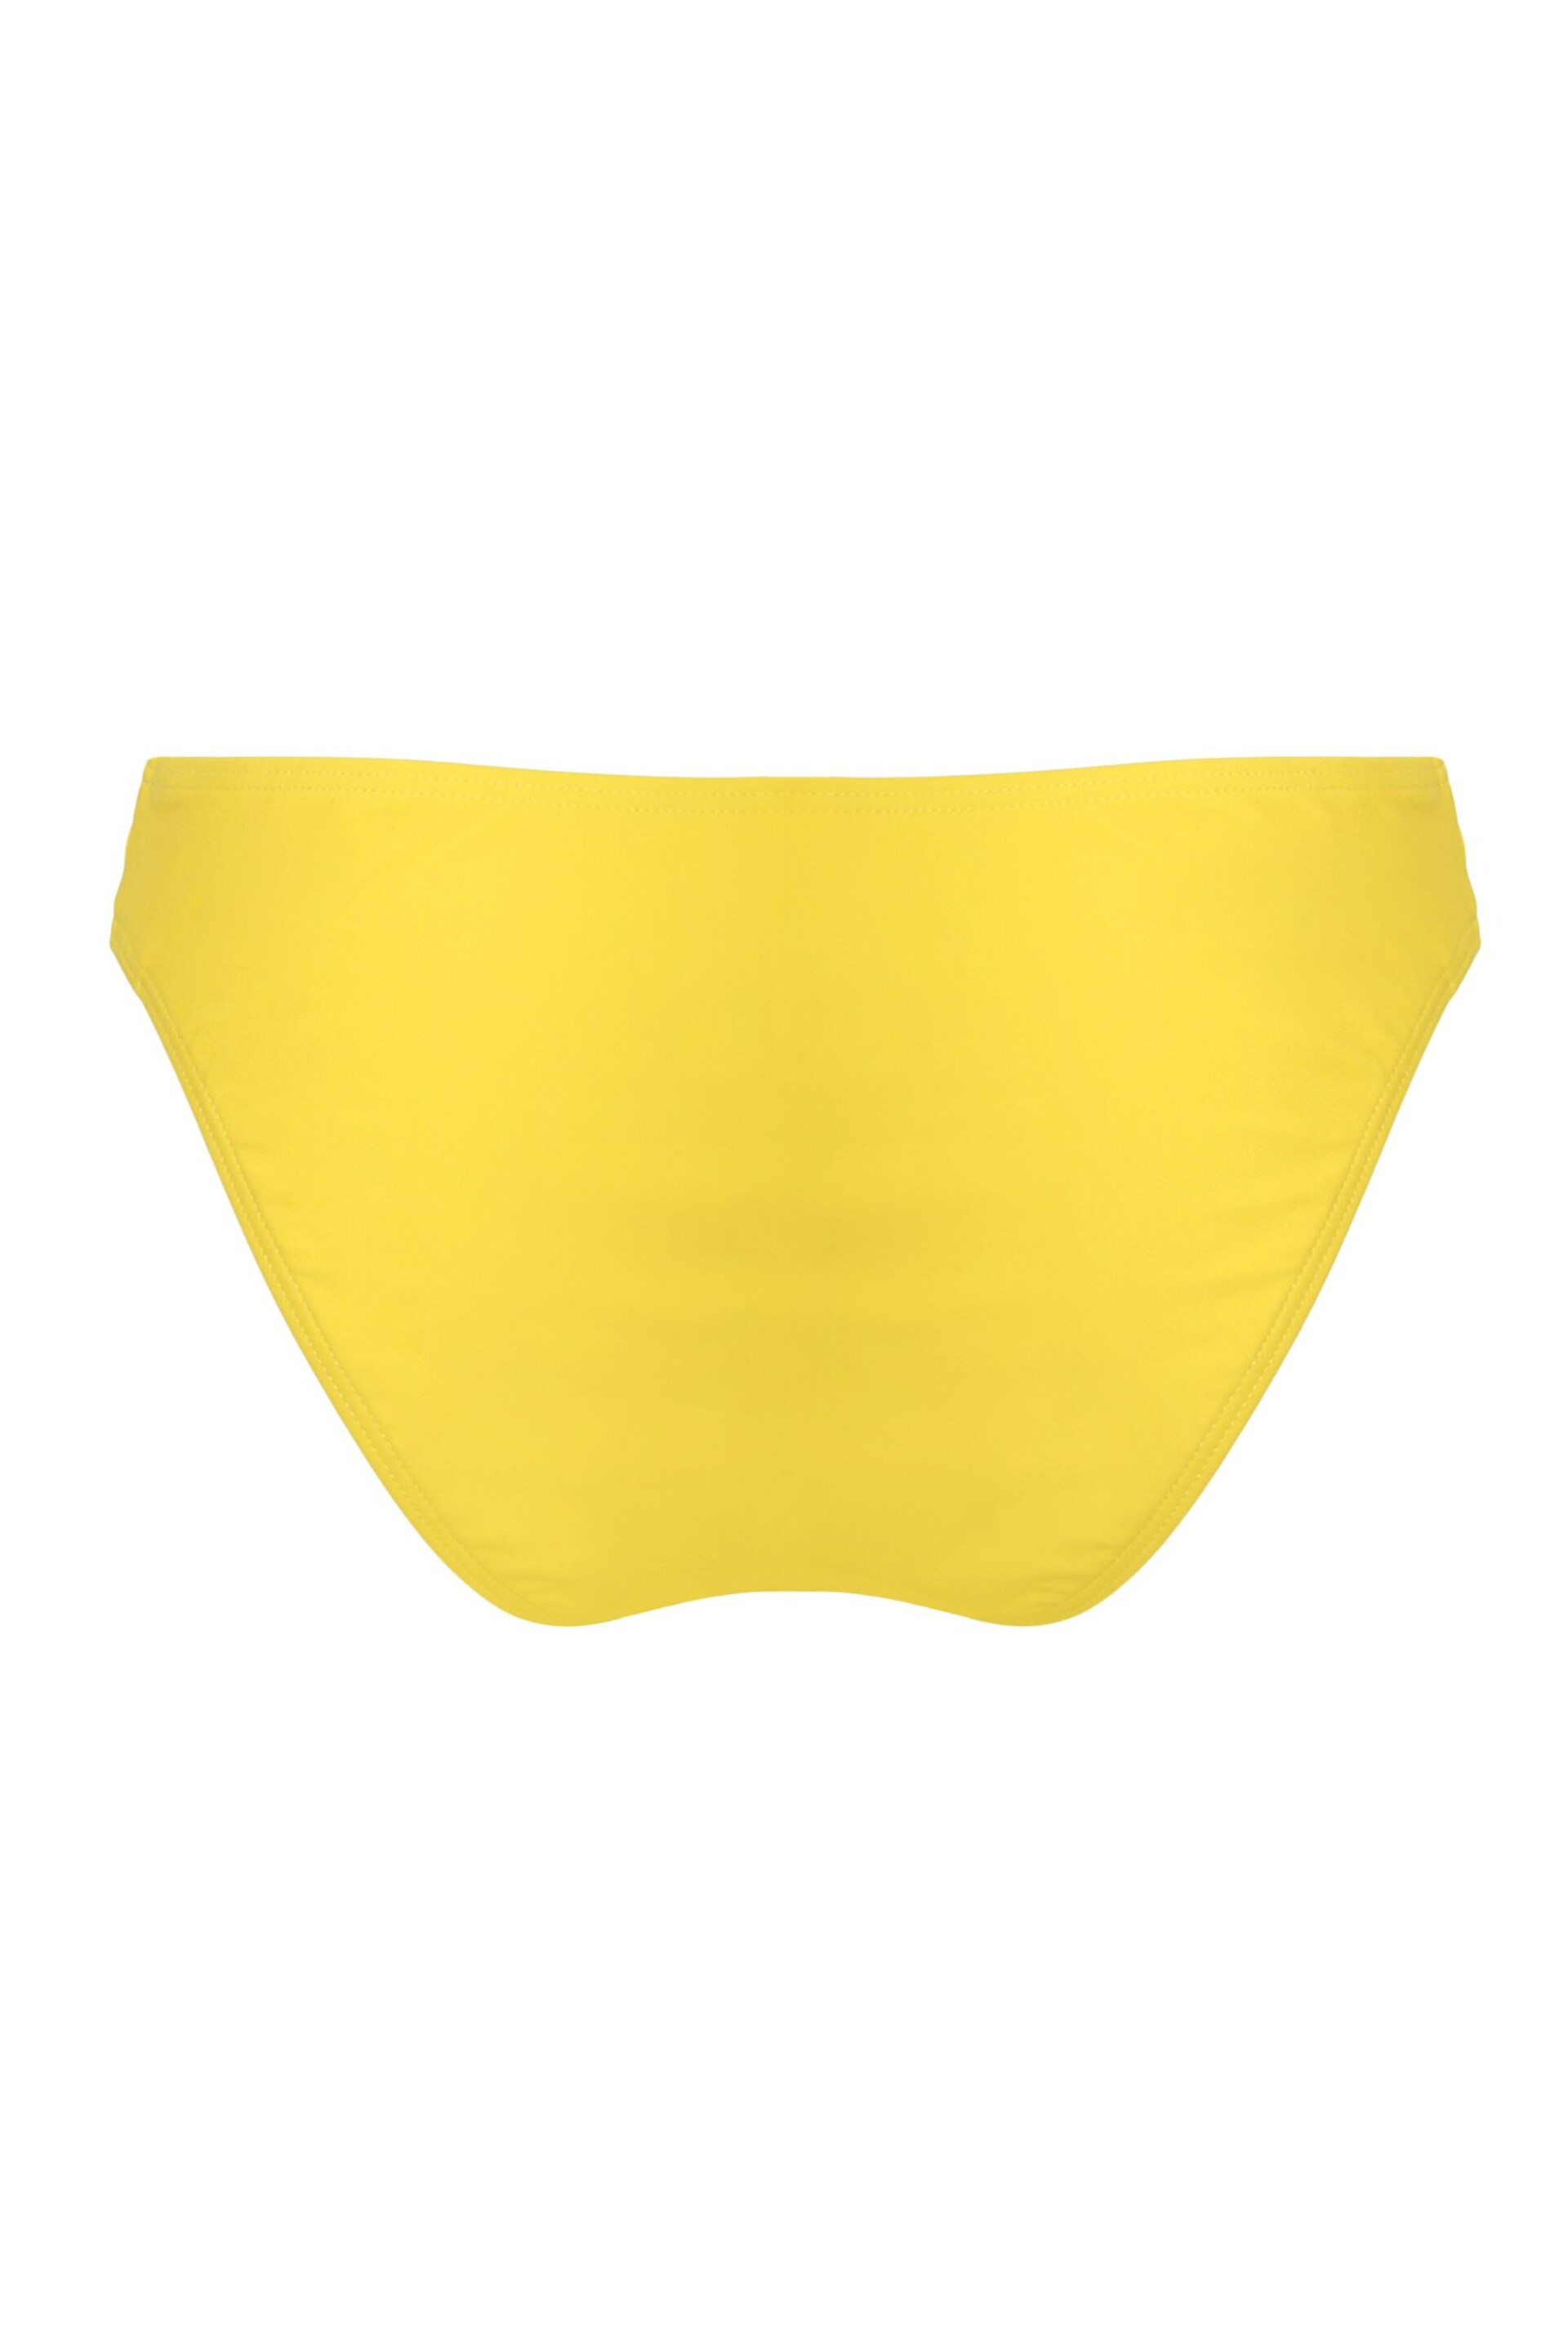 Pour Moi Yellow Gold Coast Briefs - Image 5 of 5